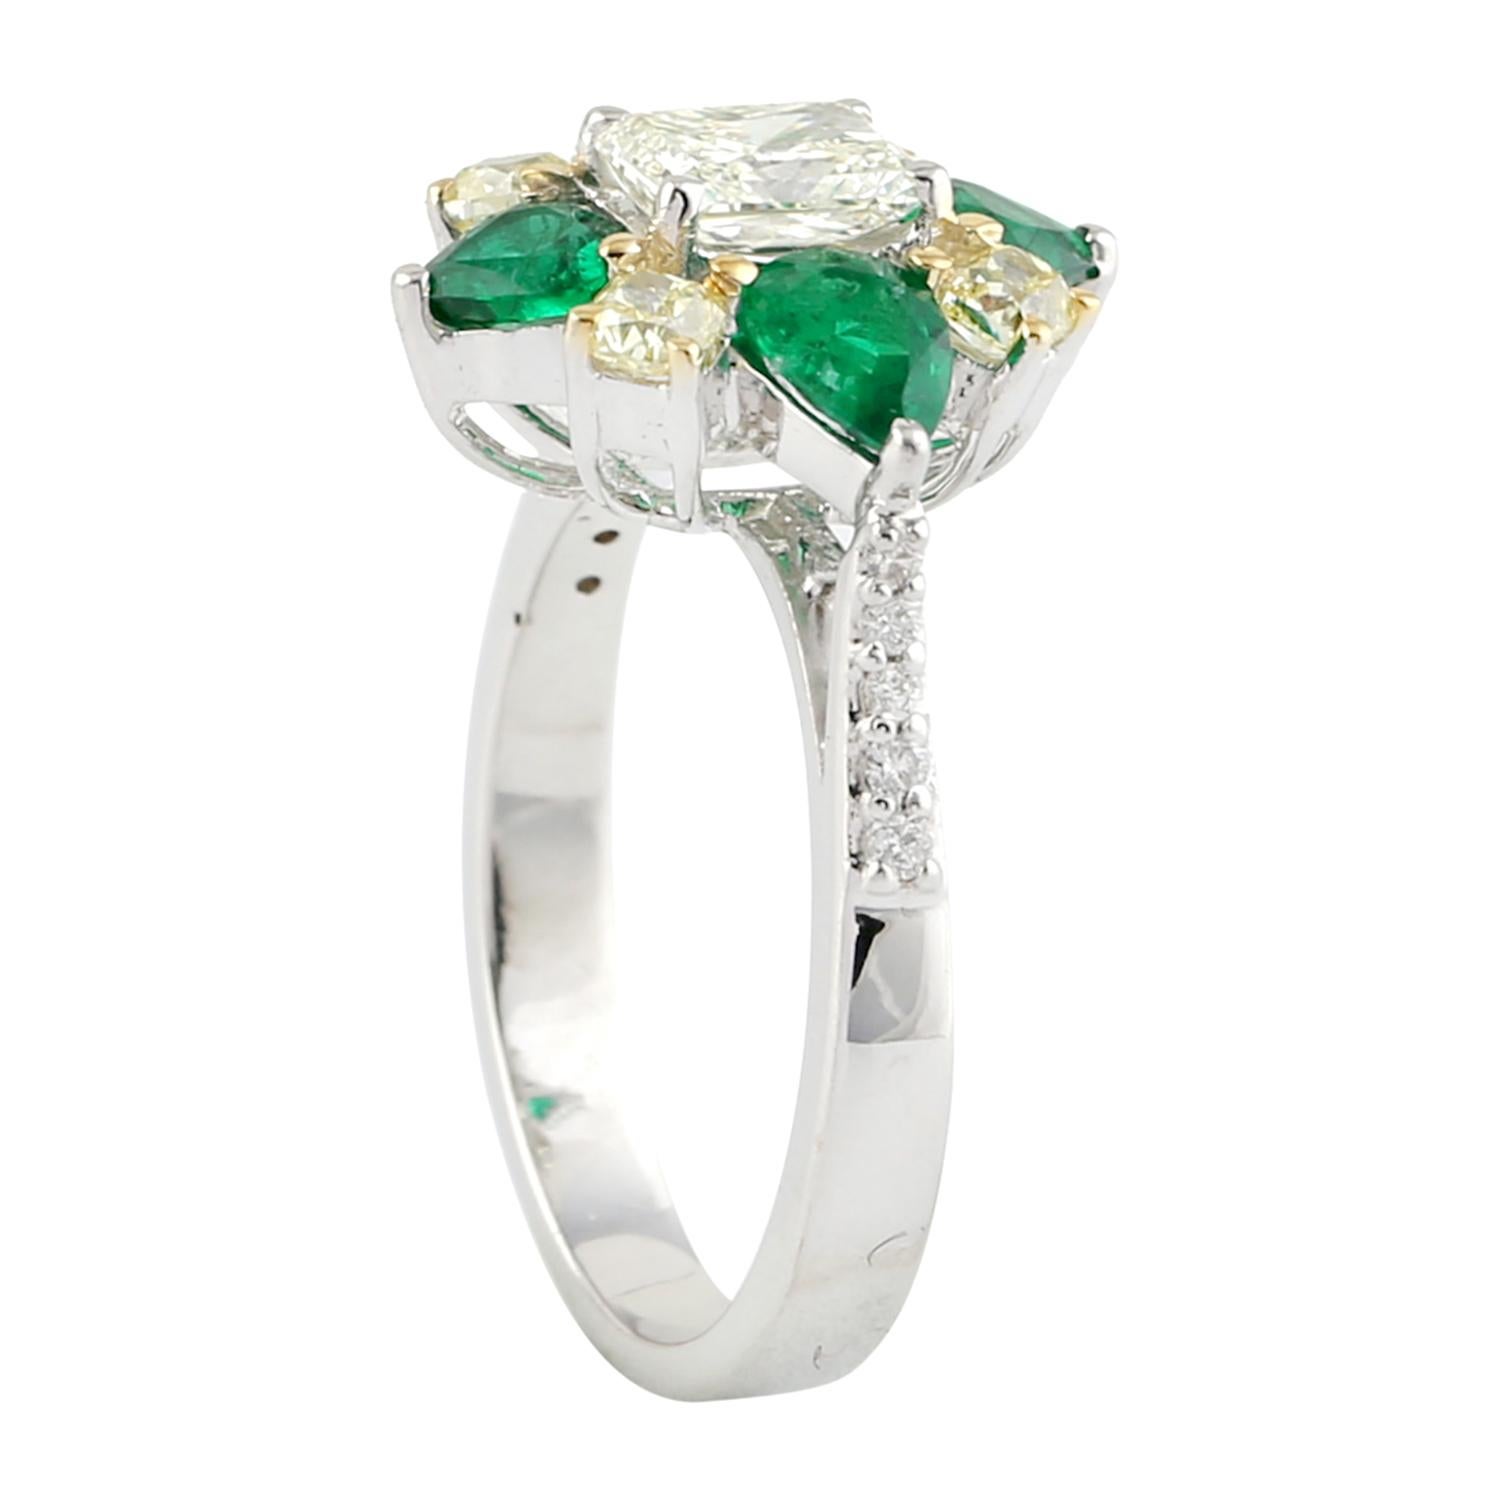 Mixed Cut 1.14 ct Pear Shaped Zambian Emeralds Flower Ring with Diamonds In 18k White Gold For Sale